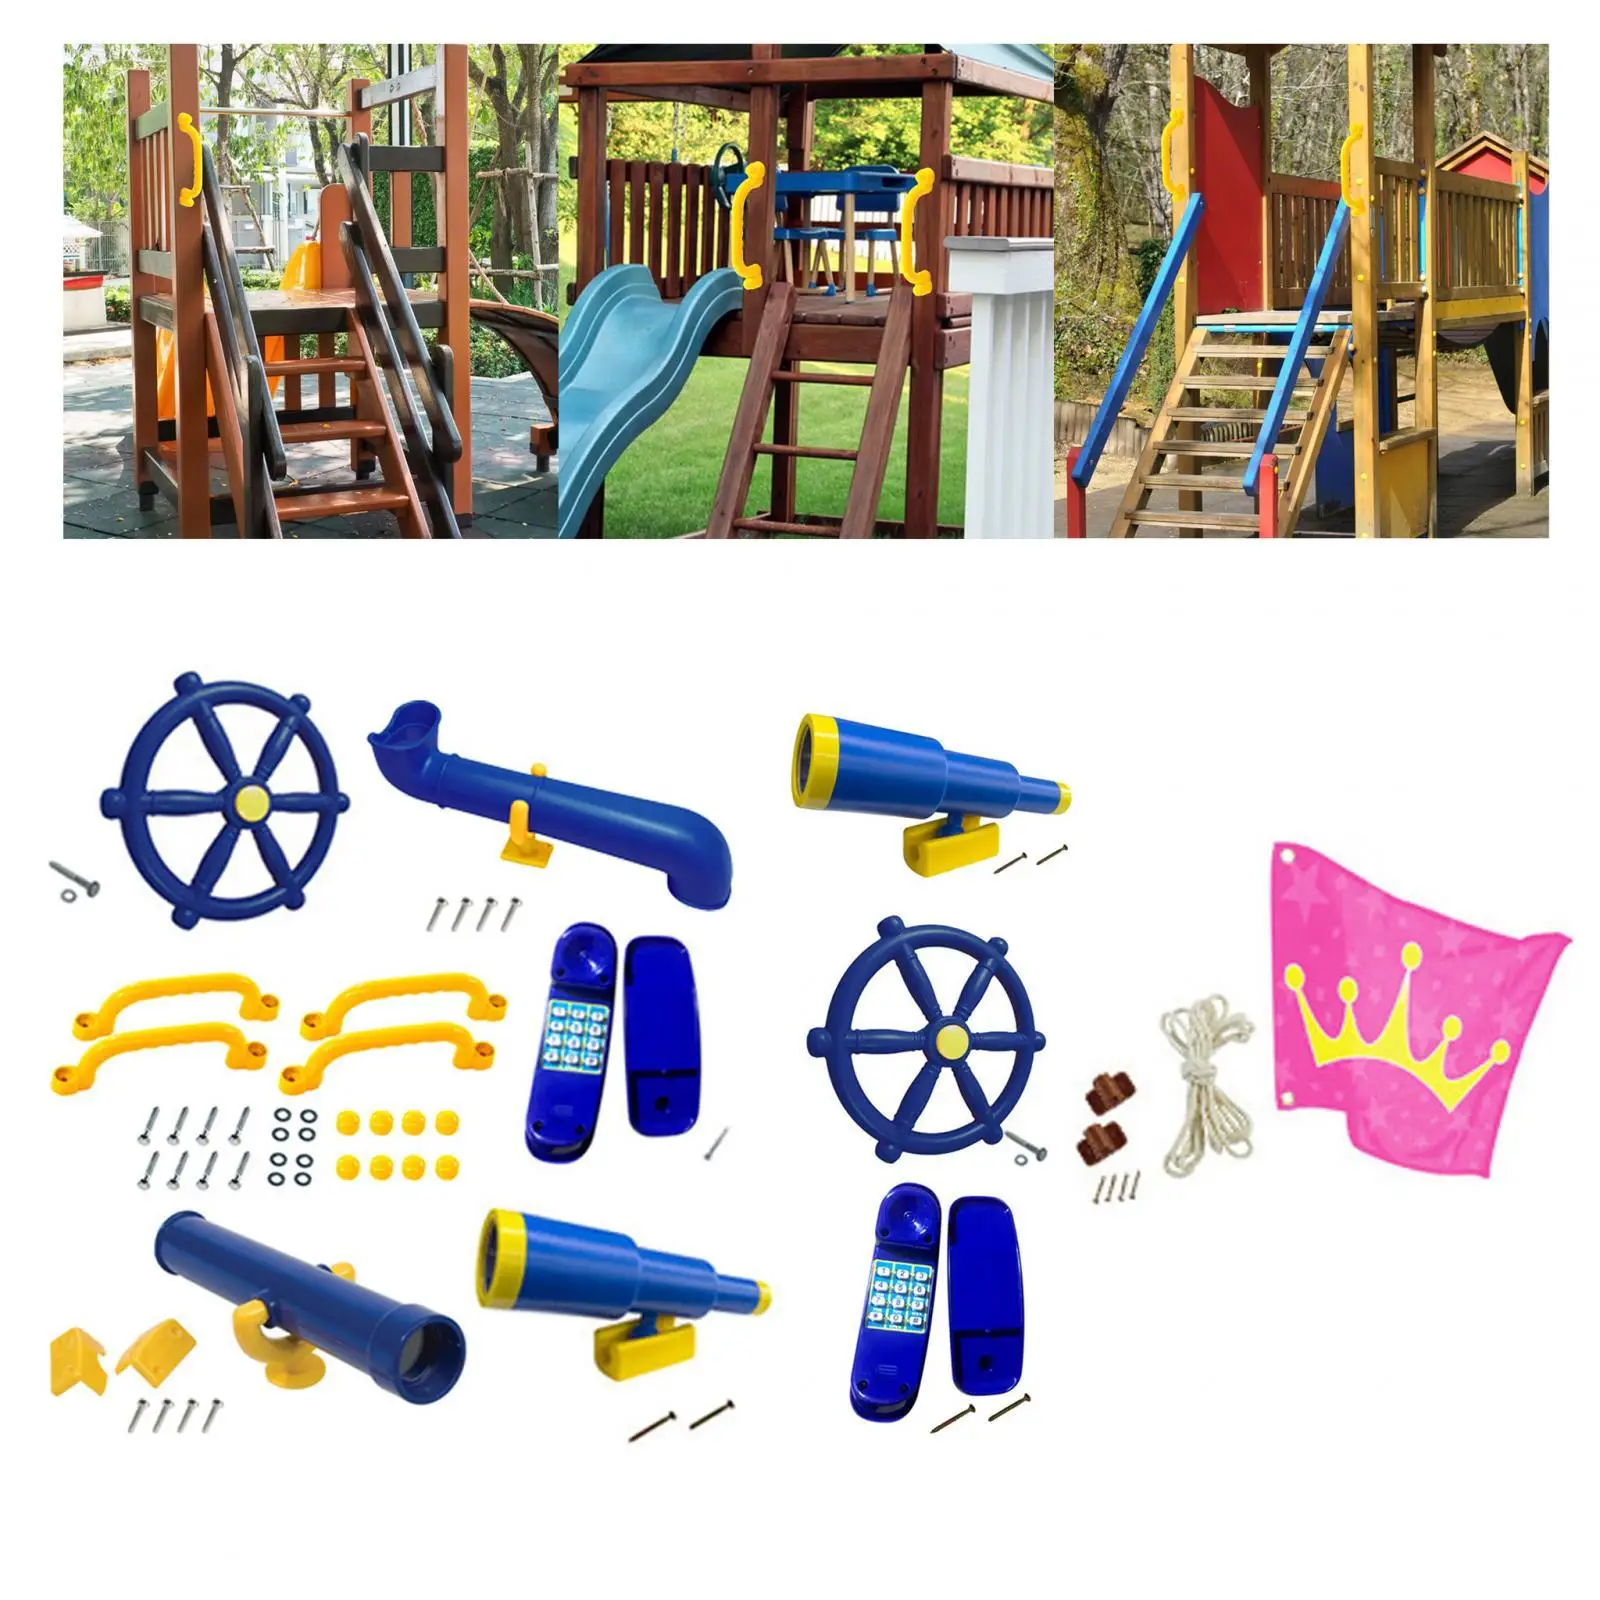 Playground Accessories set for Backyard Tree House Play House